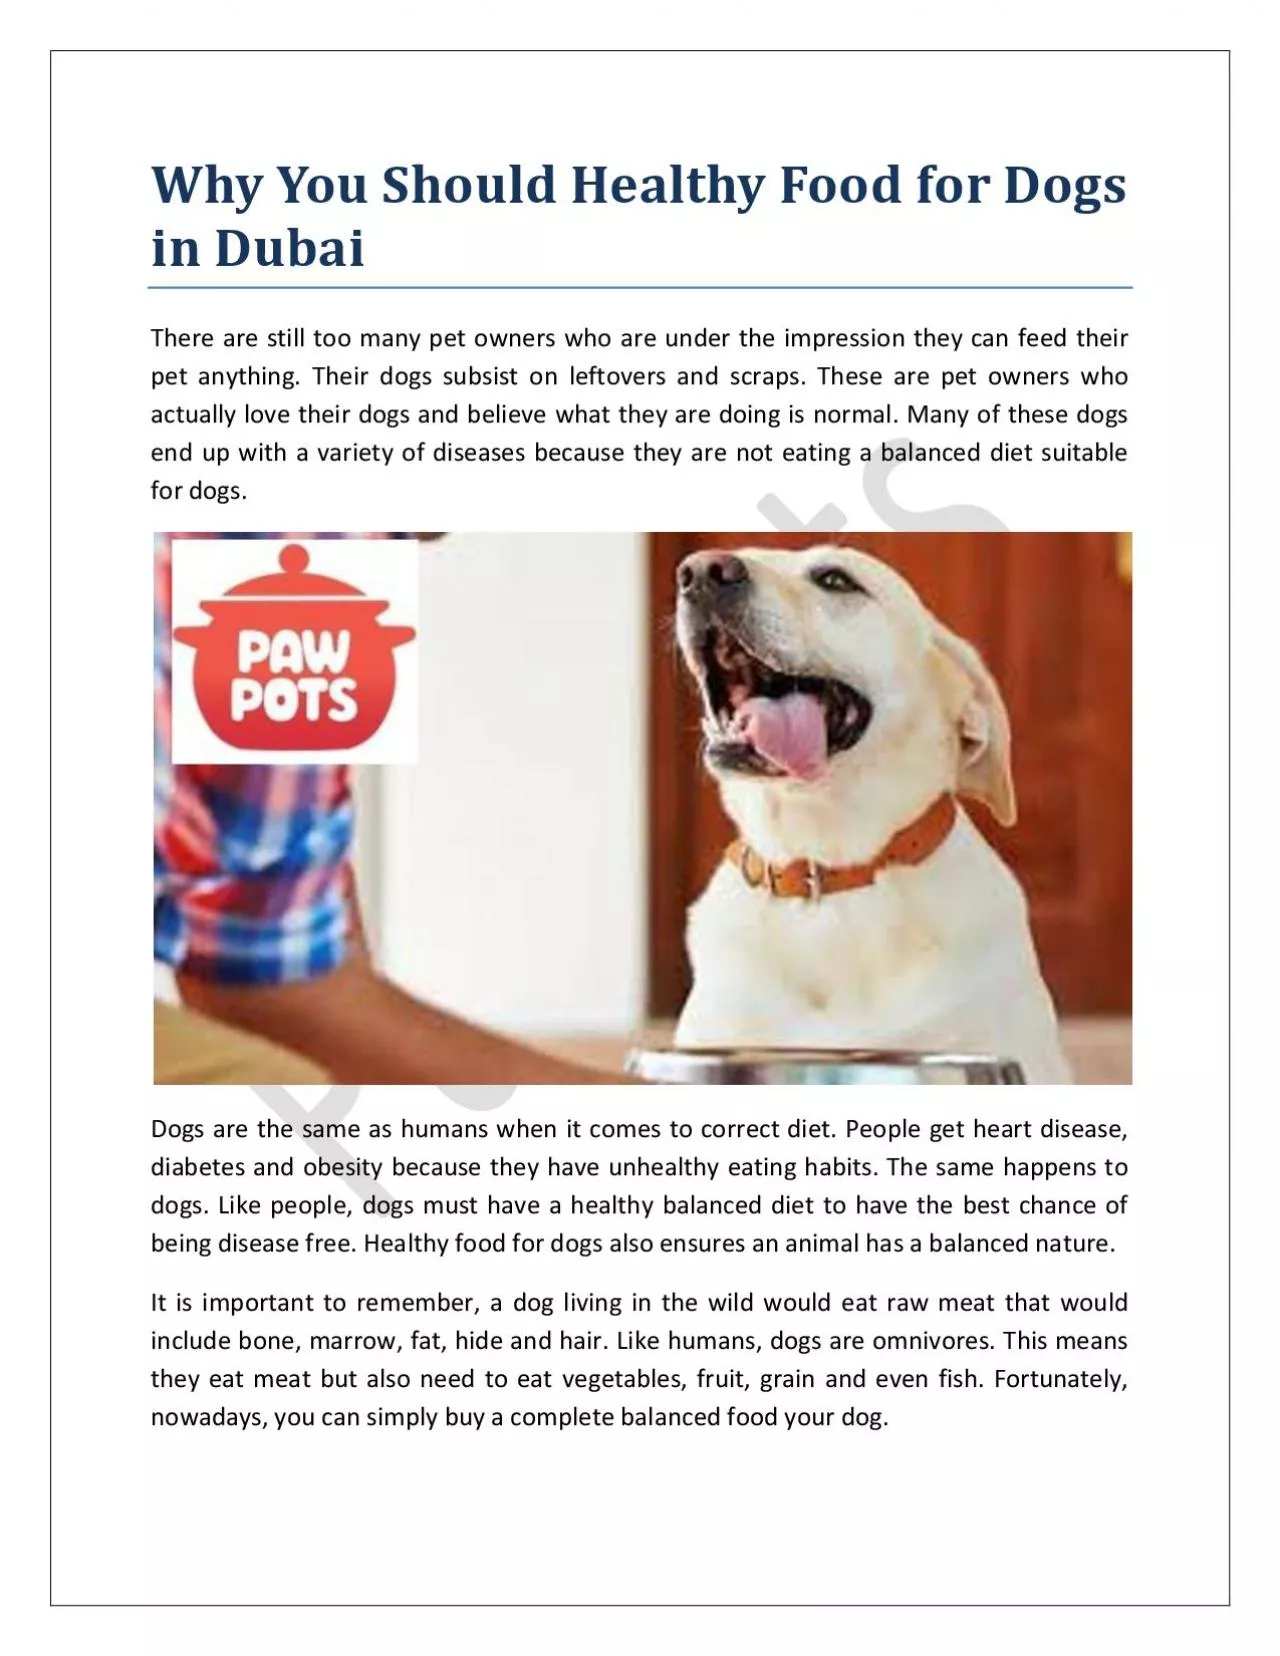 Why You Should Healthy Food for Dogs in Dubai